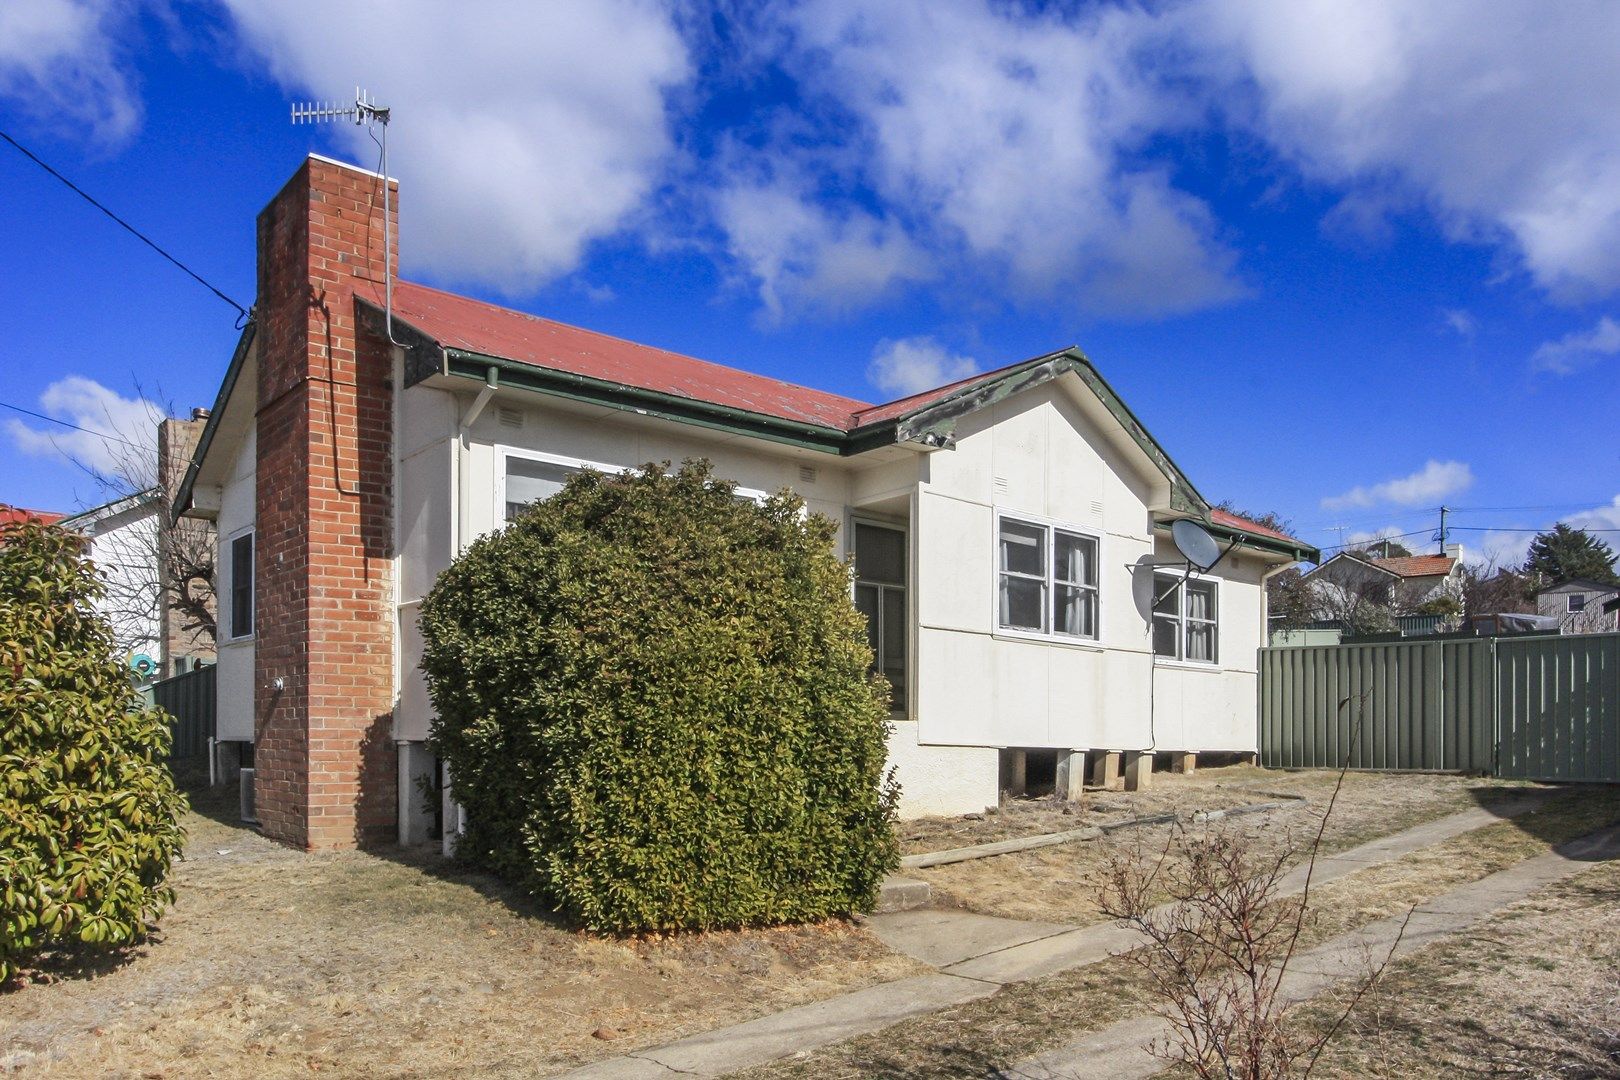 15 BAROONA AVE, Cooma NSW 2630, Image 0